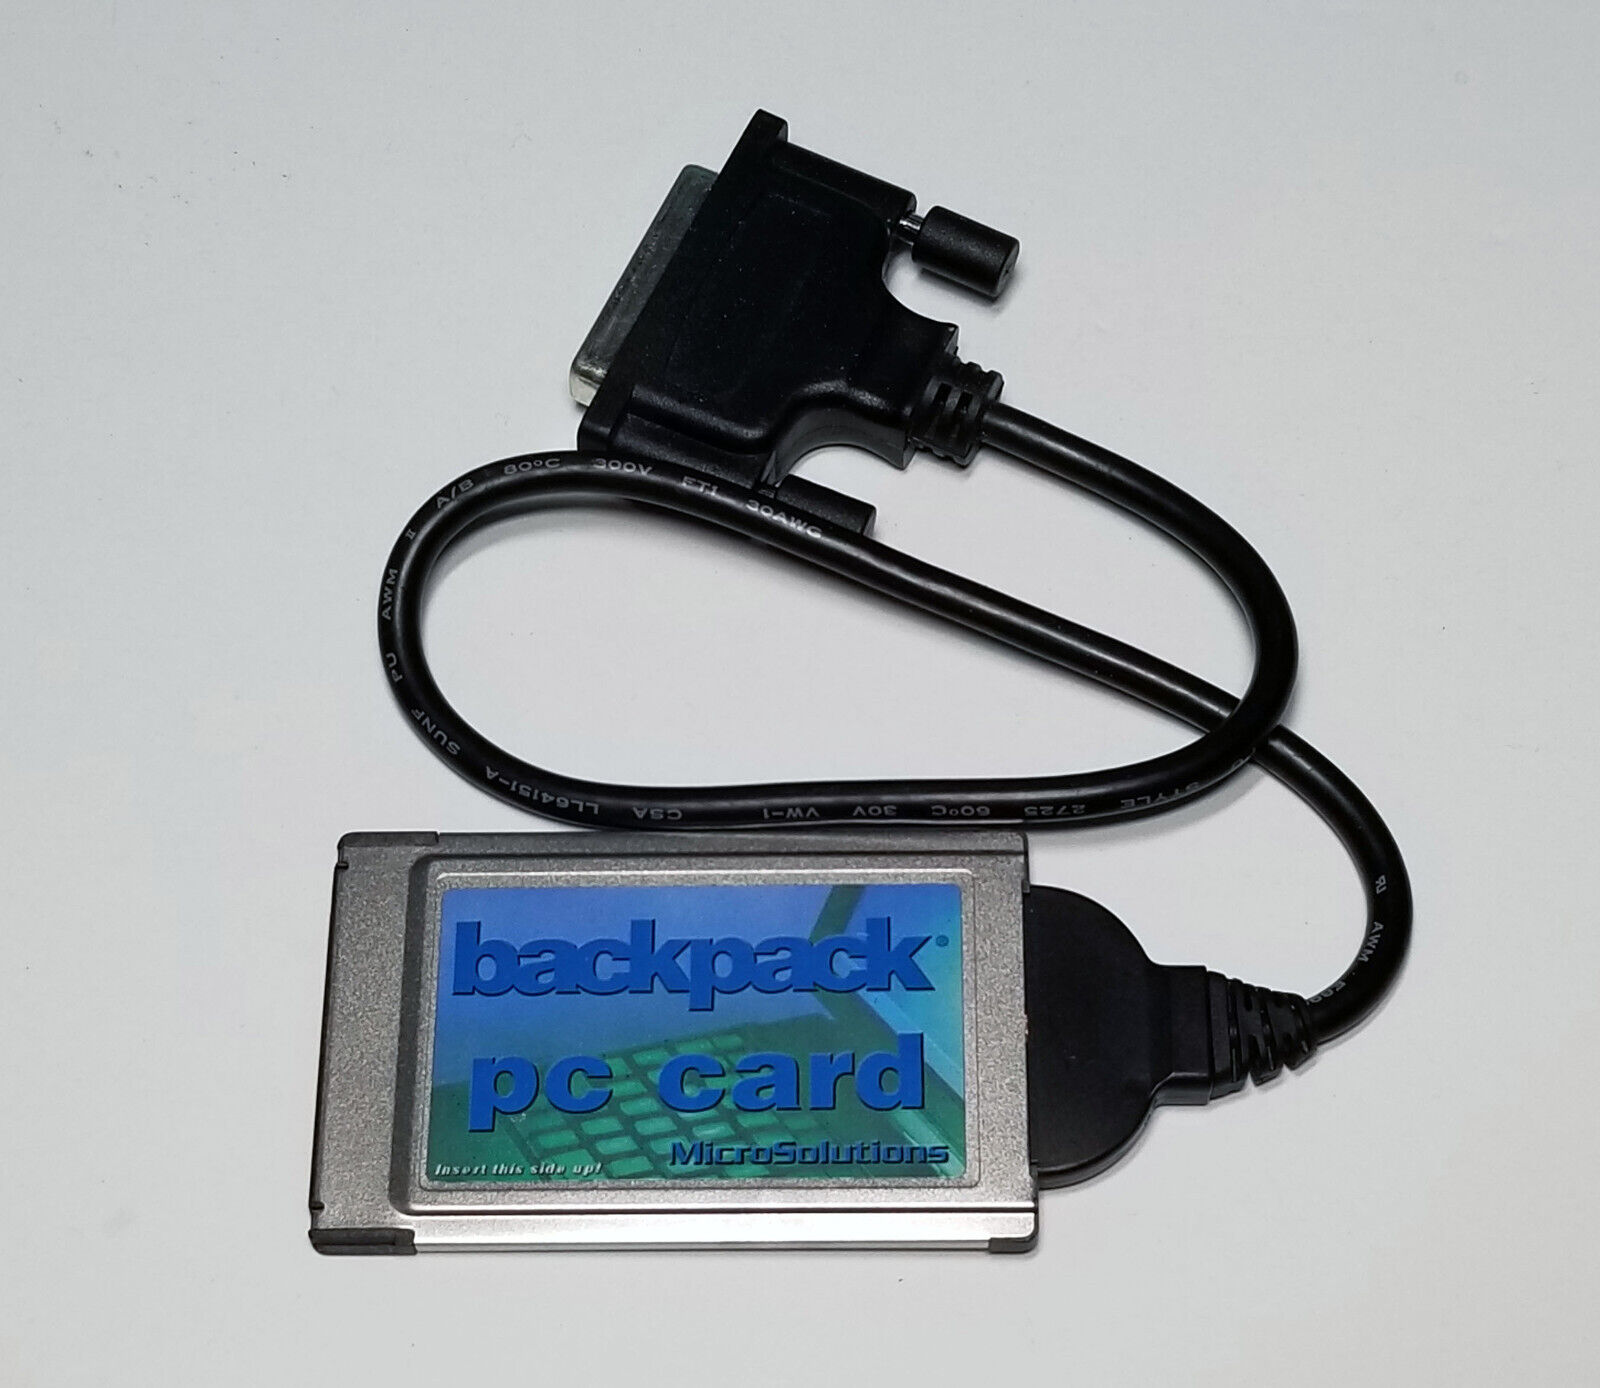 Micro Solutions Backpack PC Card 836 PCMCIA CD Drive Interface